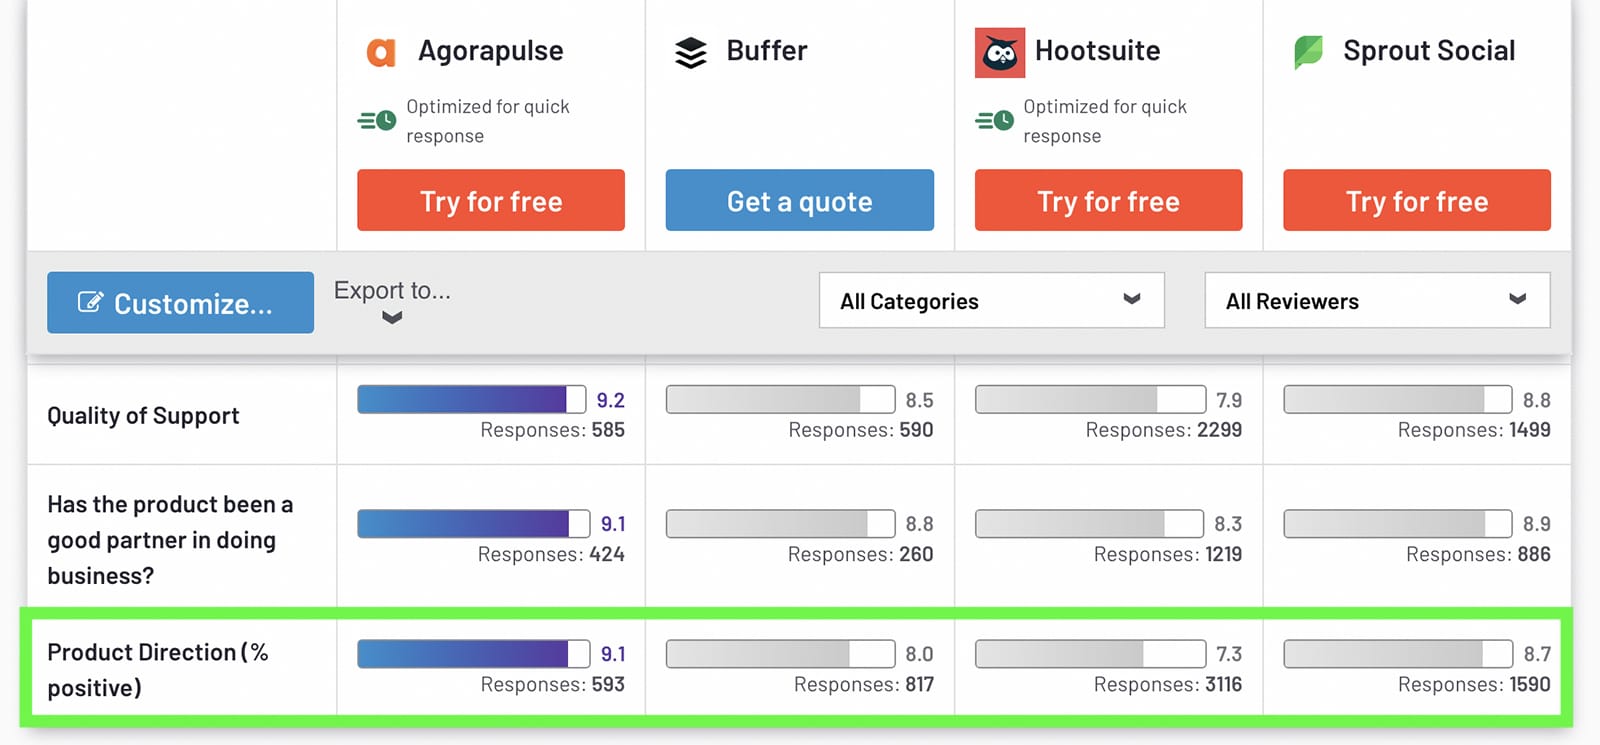 hootsuite's production direction rating